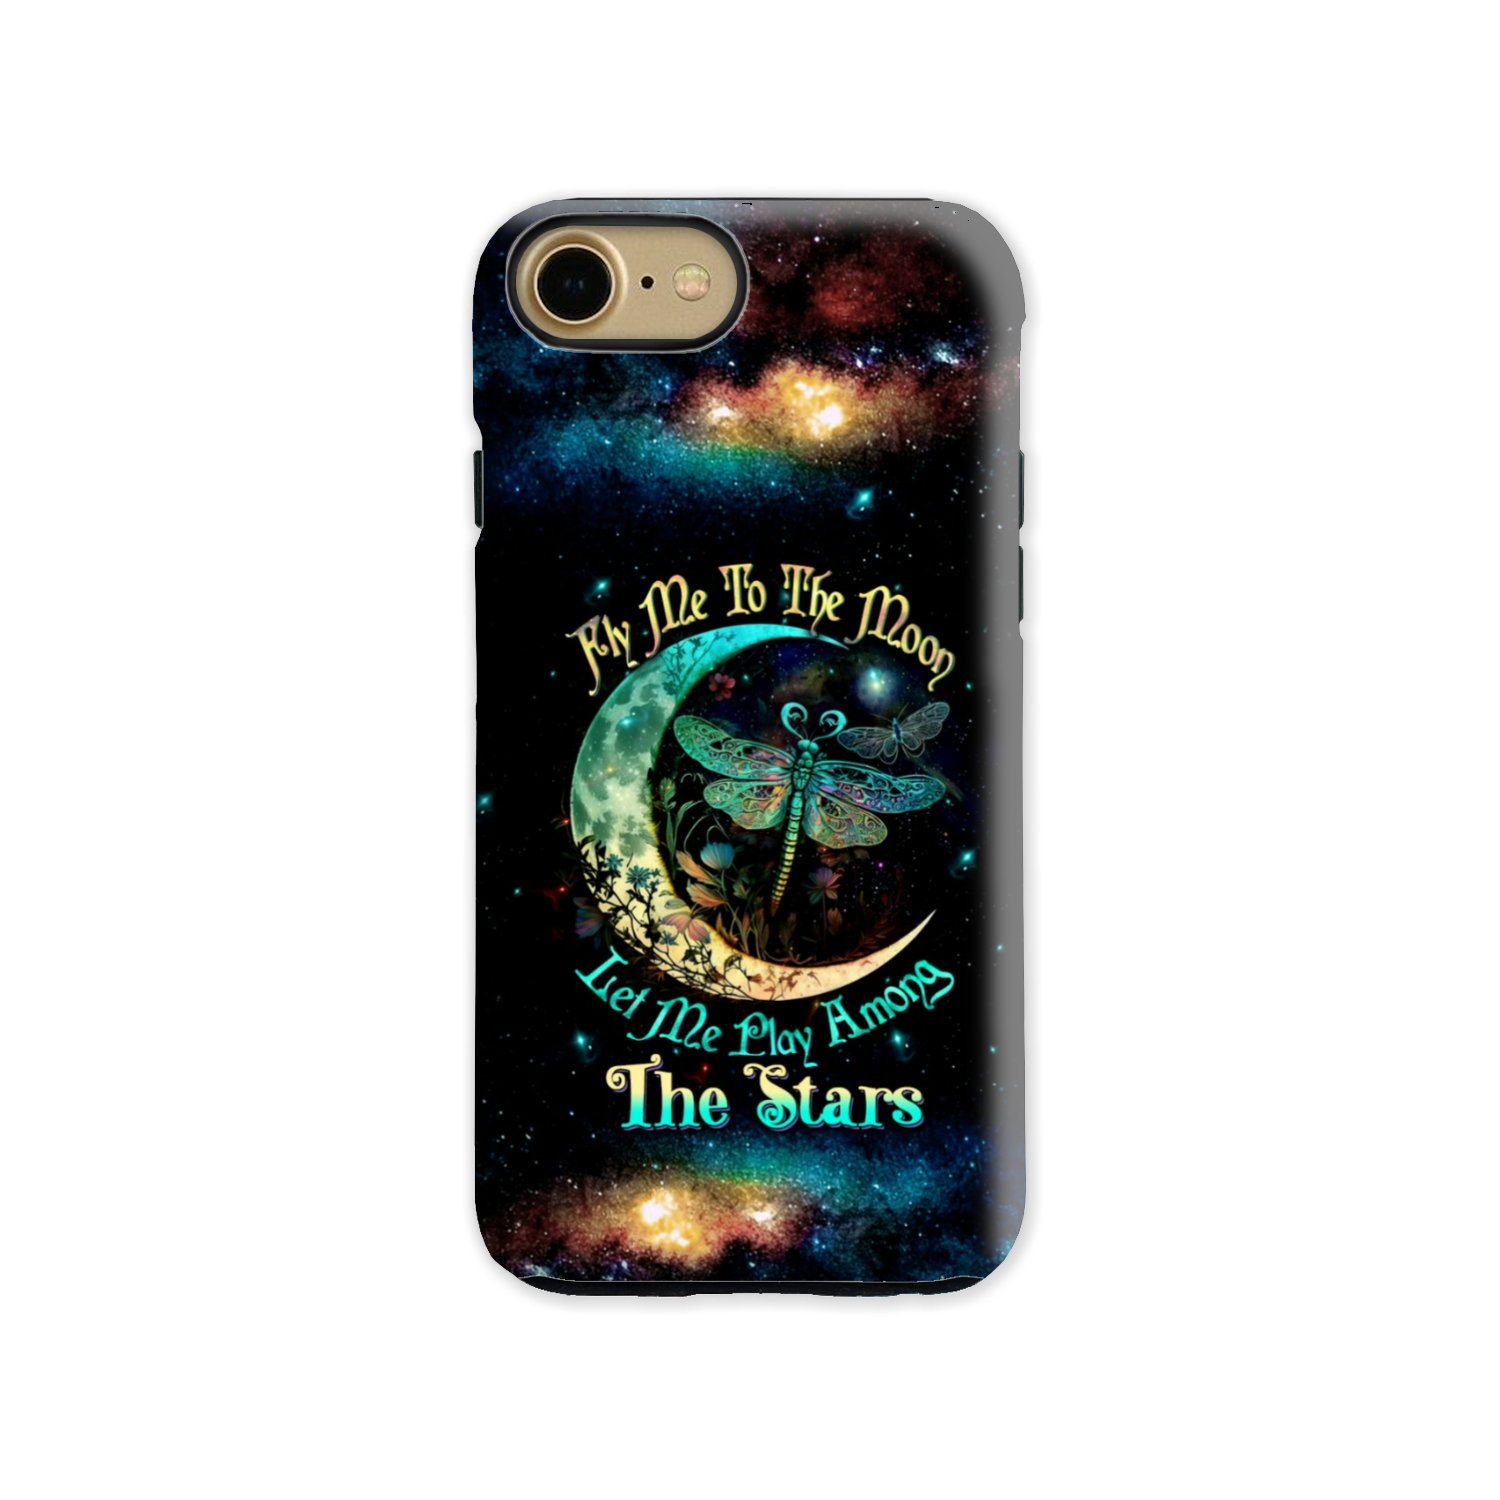 FLY ME TO THE MOON PHONE CASE - TLTW0304233